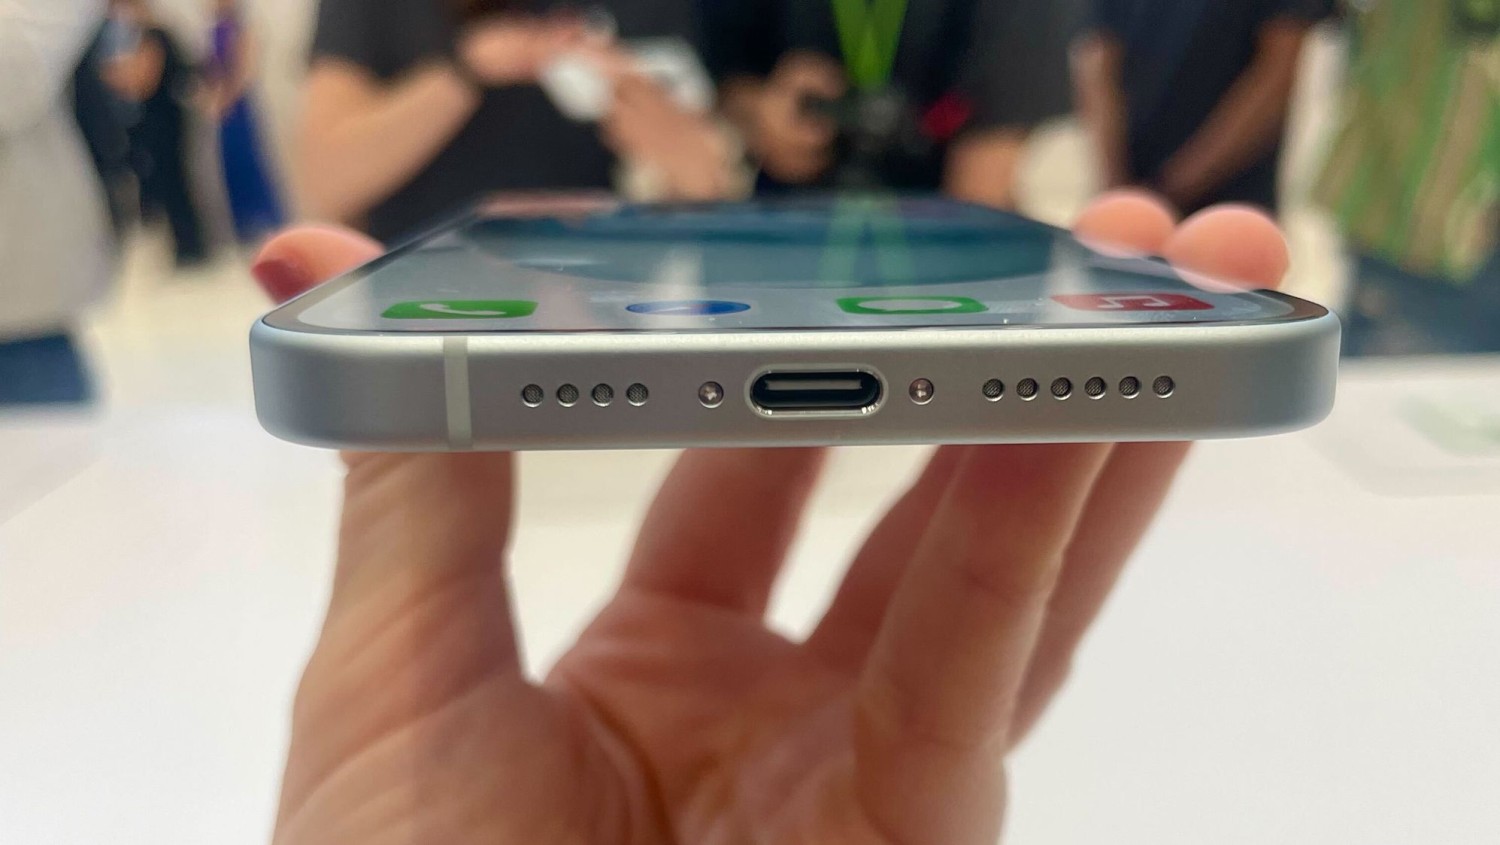 The new iPhone 15 models will now use a USB-C charging cord, ending an 11-year run with Apple's proprietary lightning charging cable. Samantha Kelly/CNN